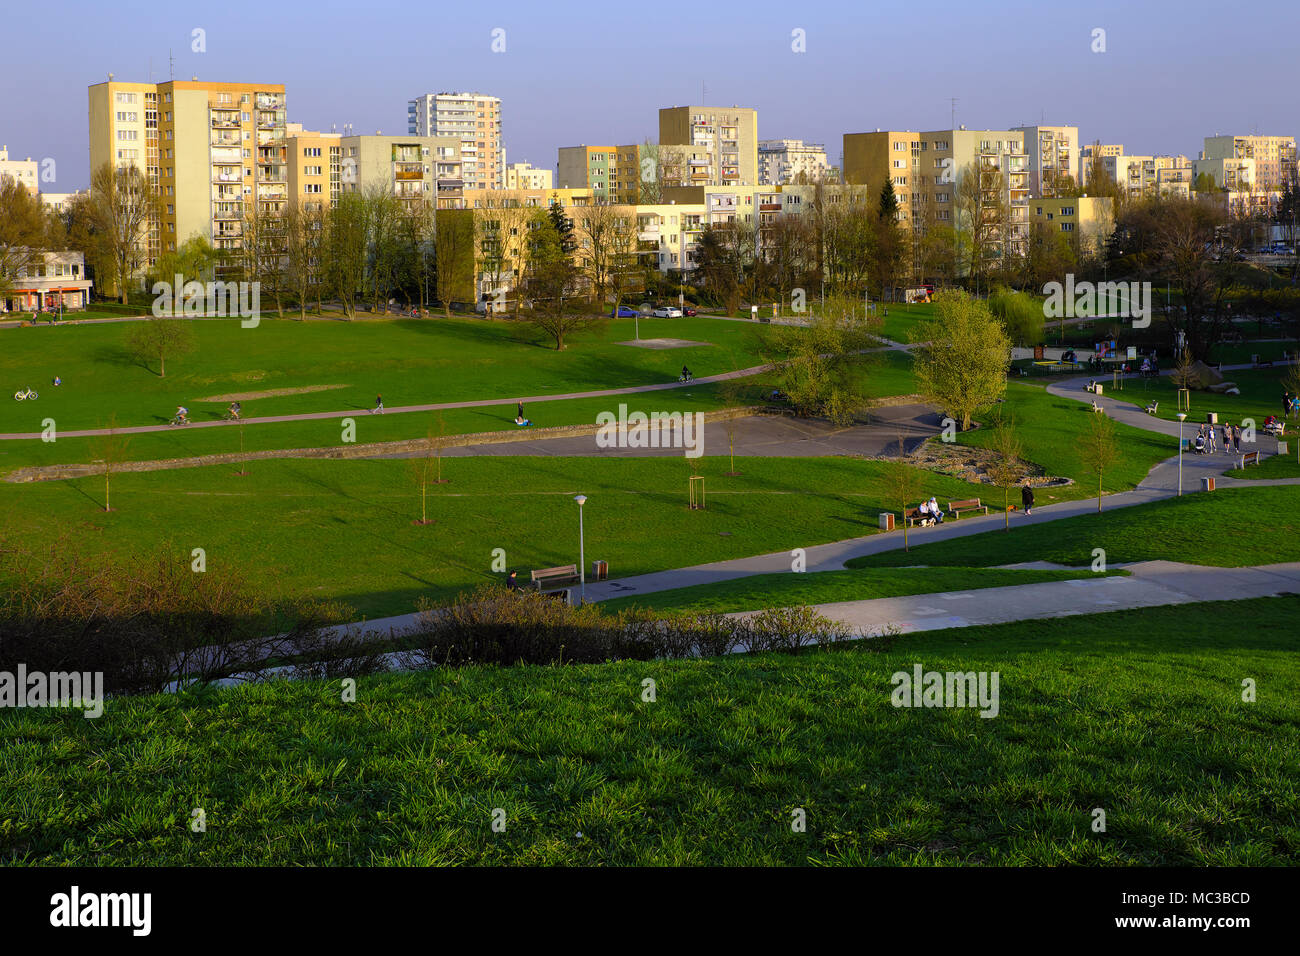 Warsaw, Mazovia / Poland - 2018/04/12: Ursynow quarter - residential district in southern Warsaw, combining post socialist multi-family development wi Stock Photo